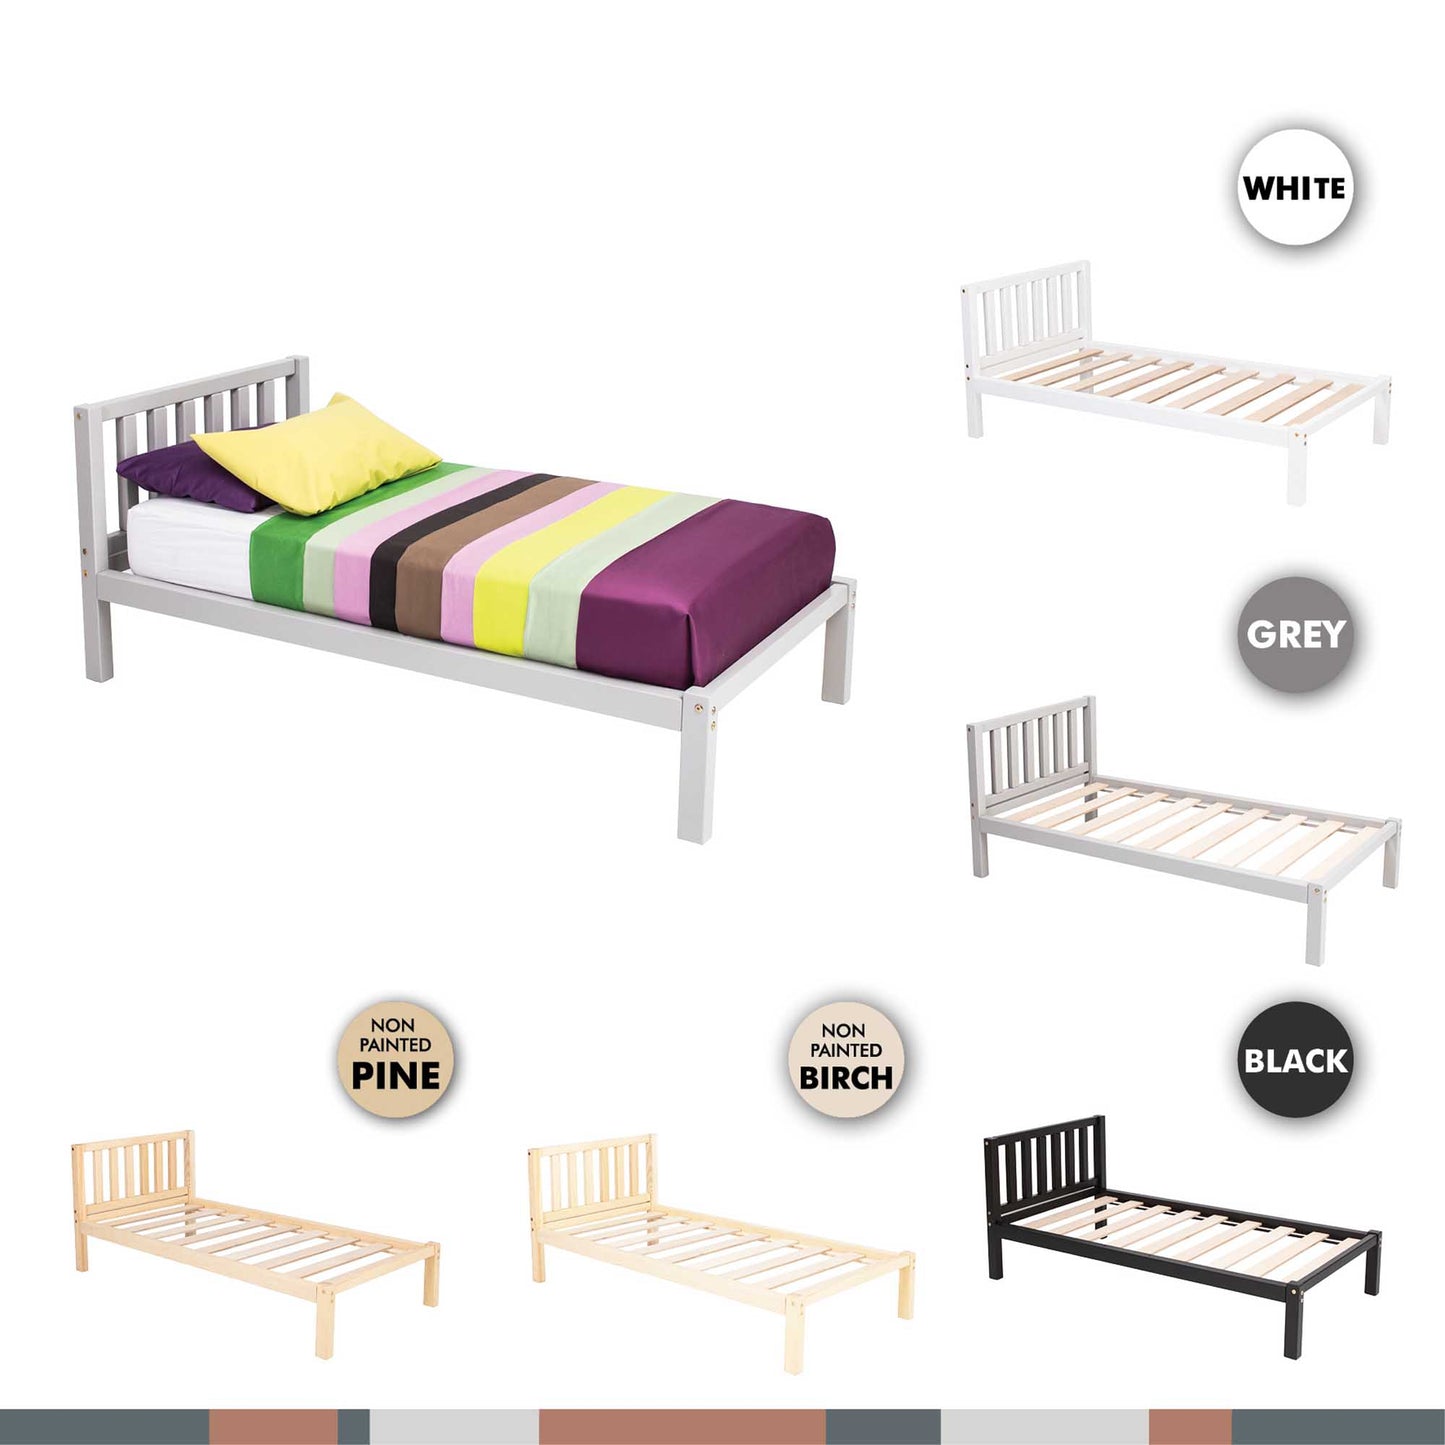 A variety of Sweet Home From Wood kids' bed on legs with a headboard in different colors and sizes.